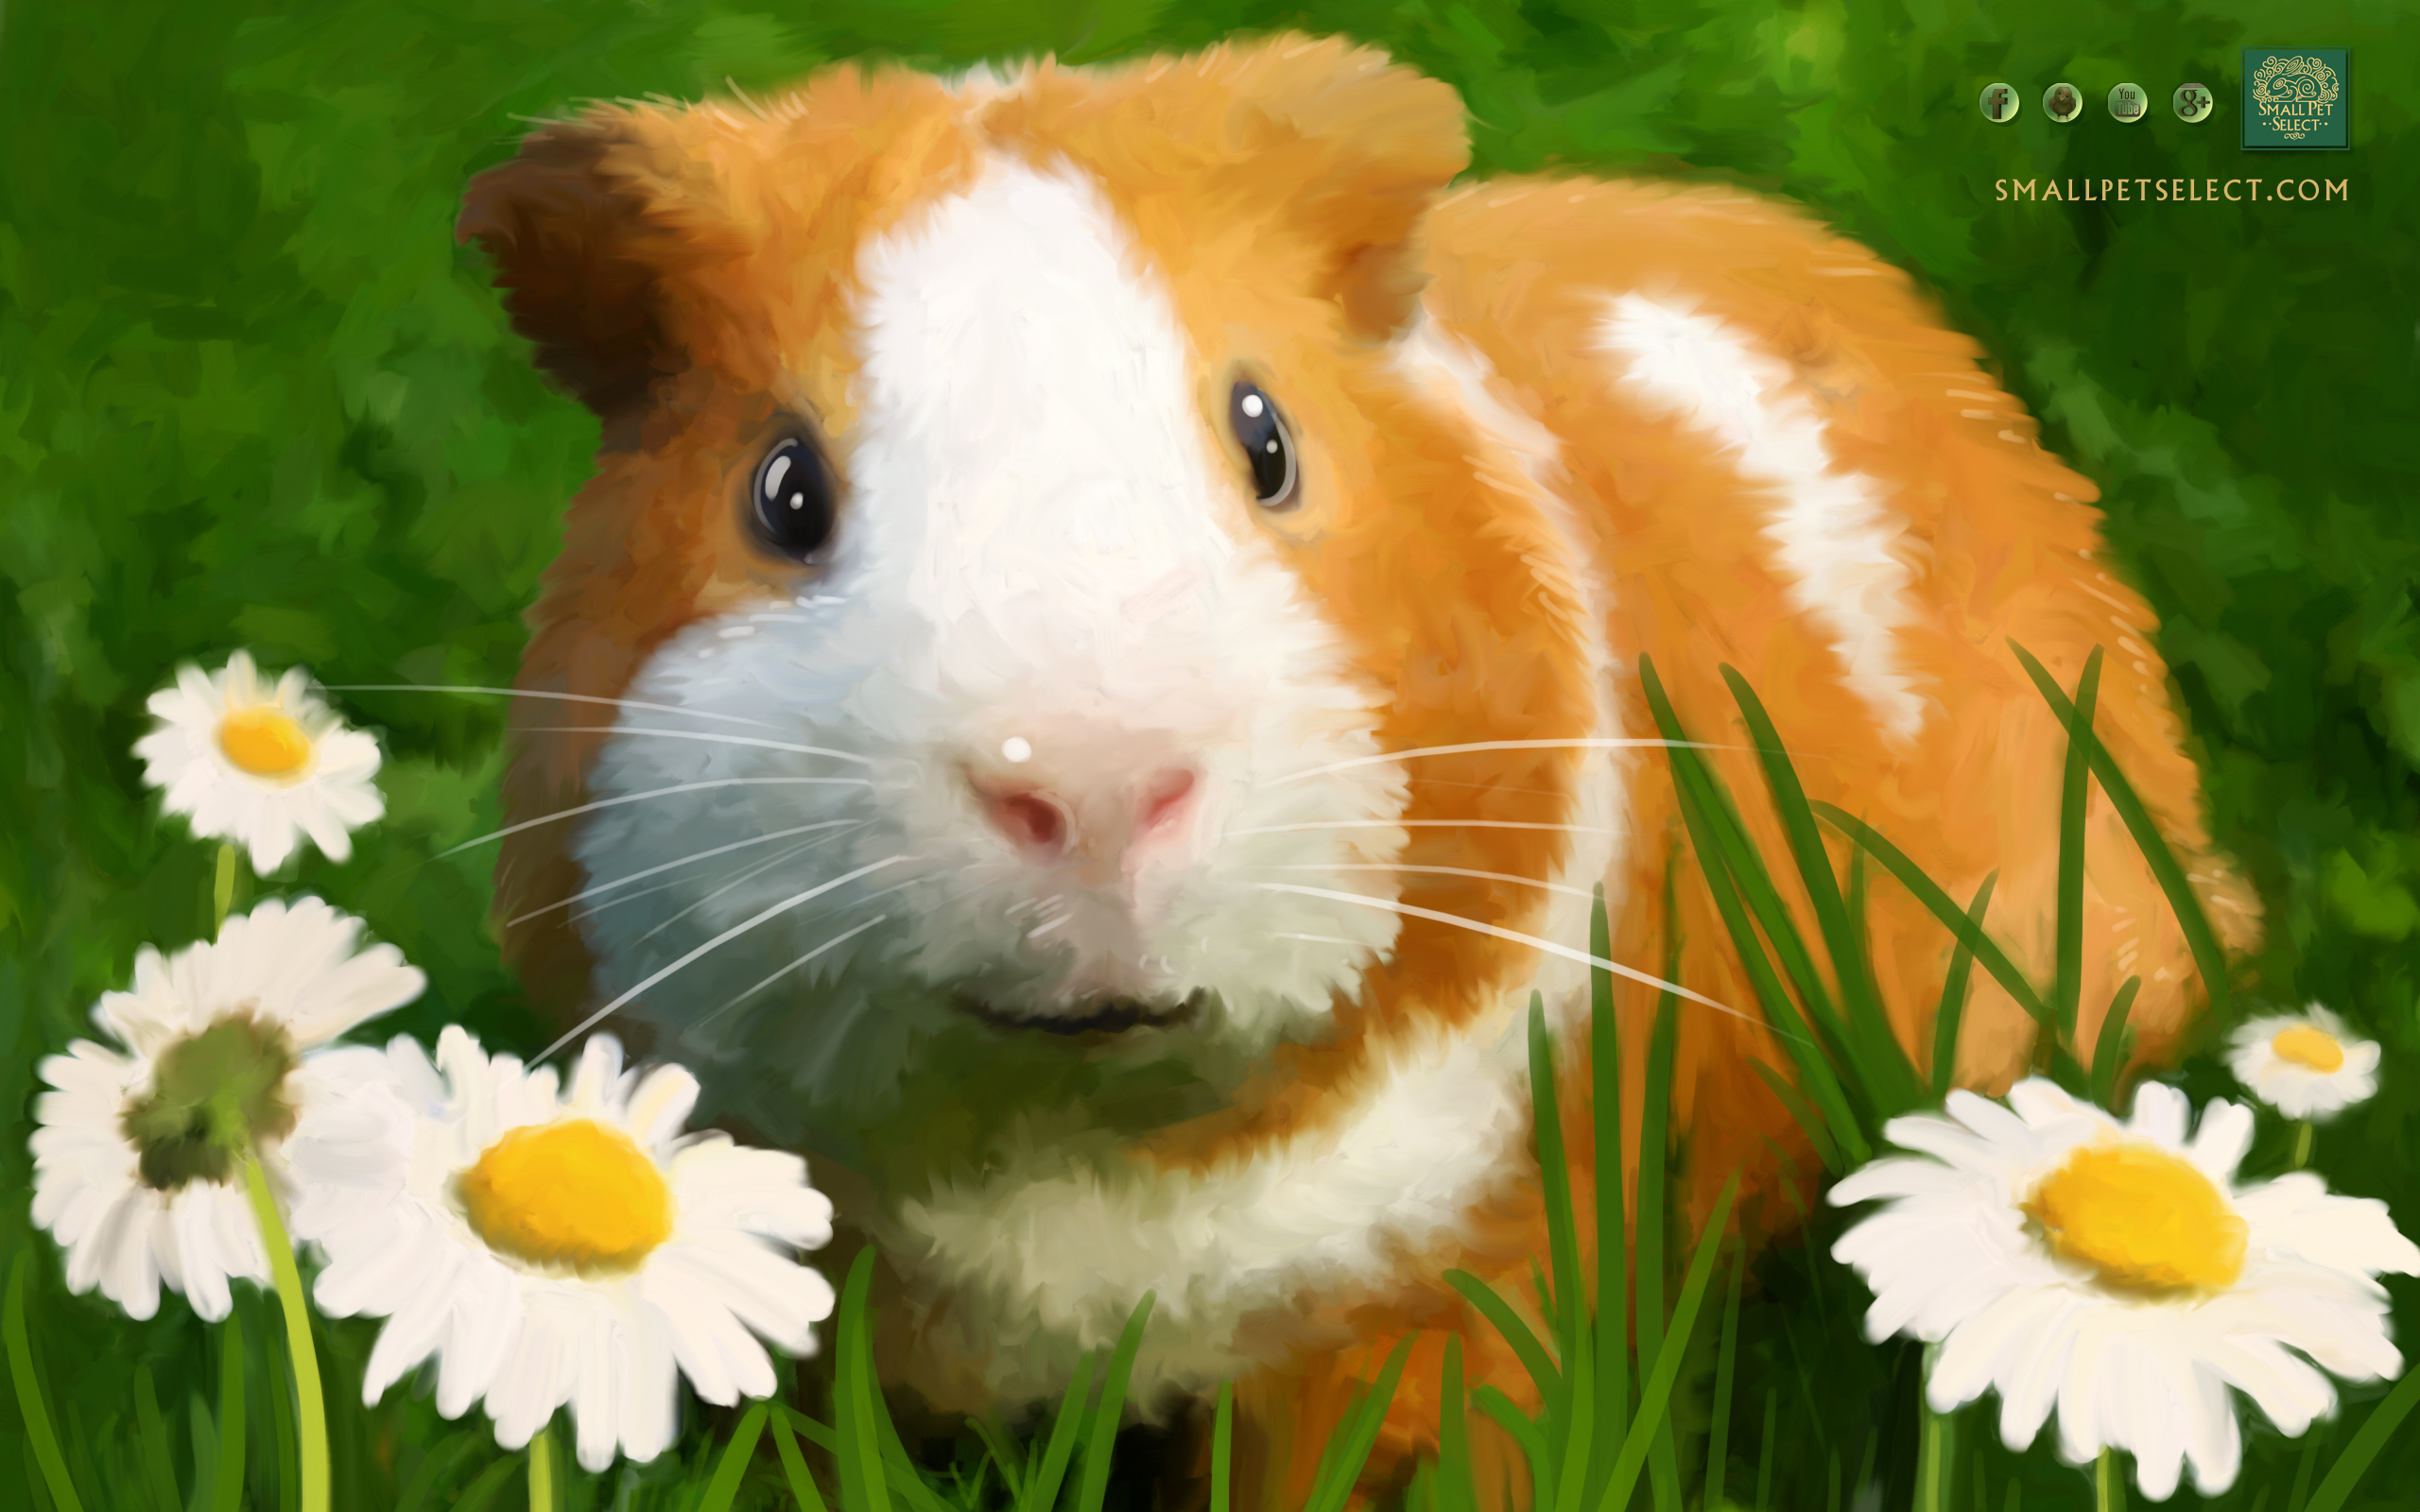 Guinea Pig Wallpaper   Screensaver for your PC MAC Ipad cell phone